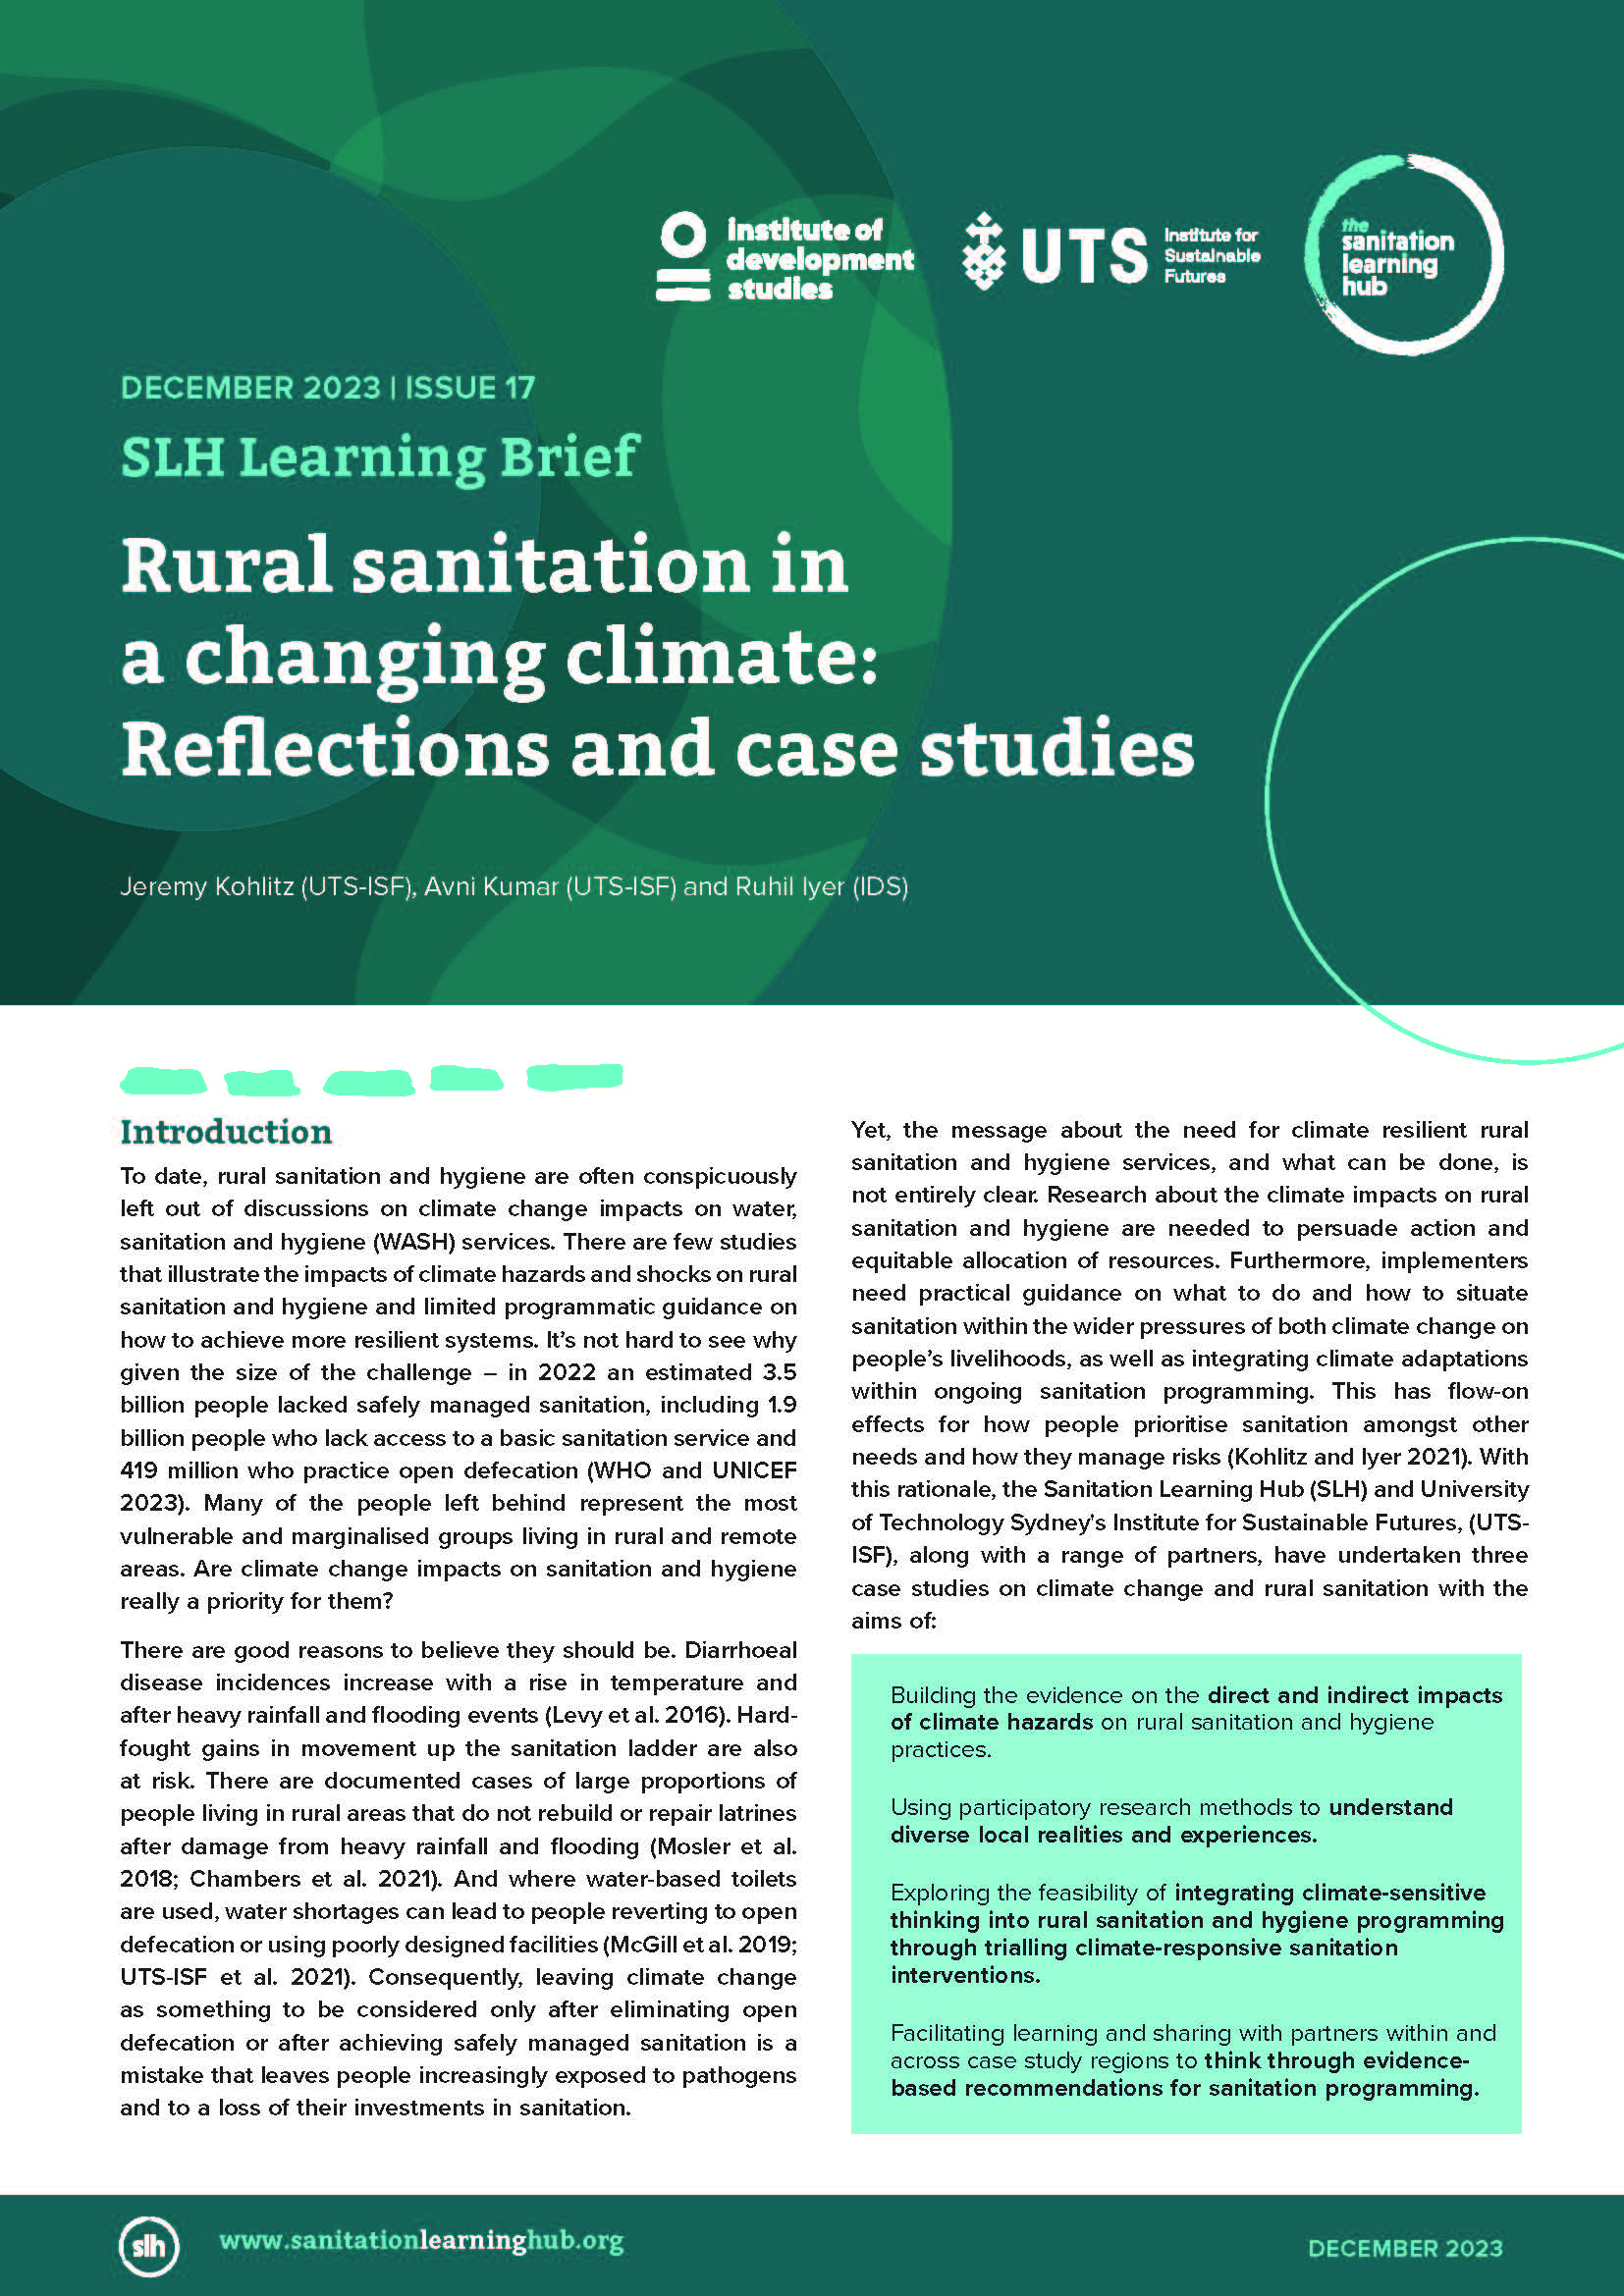 Rural sanitation in a changing climate: Reflections and case studies